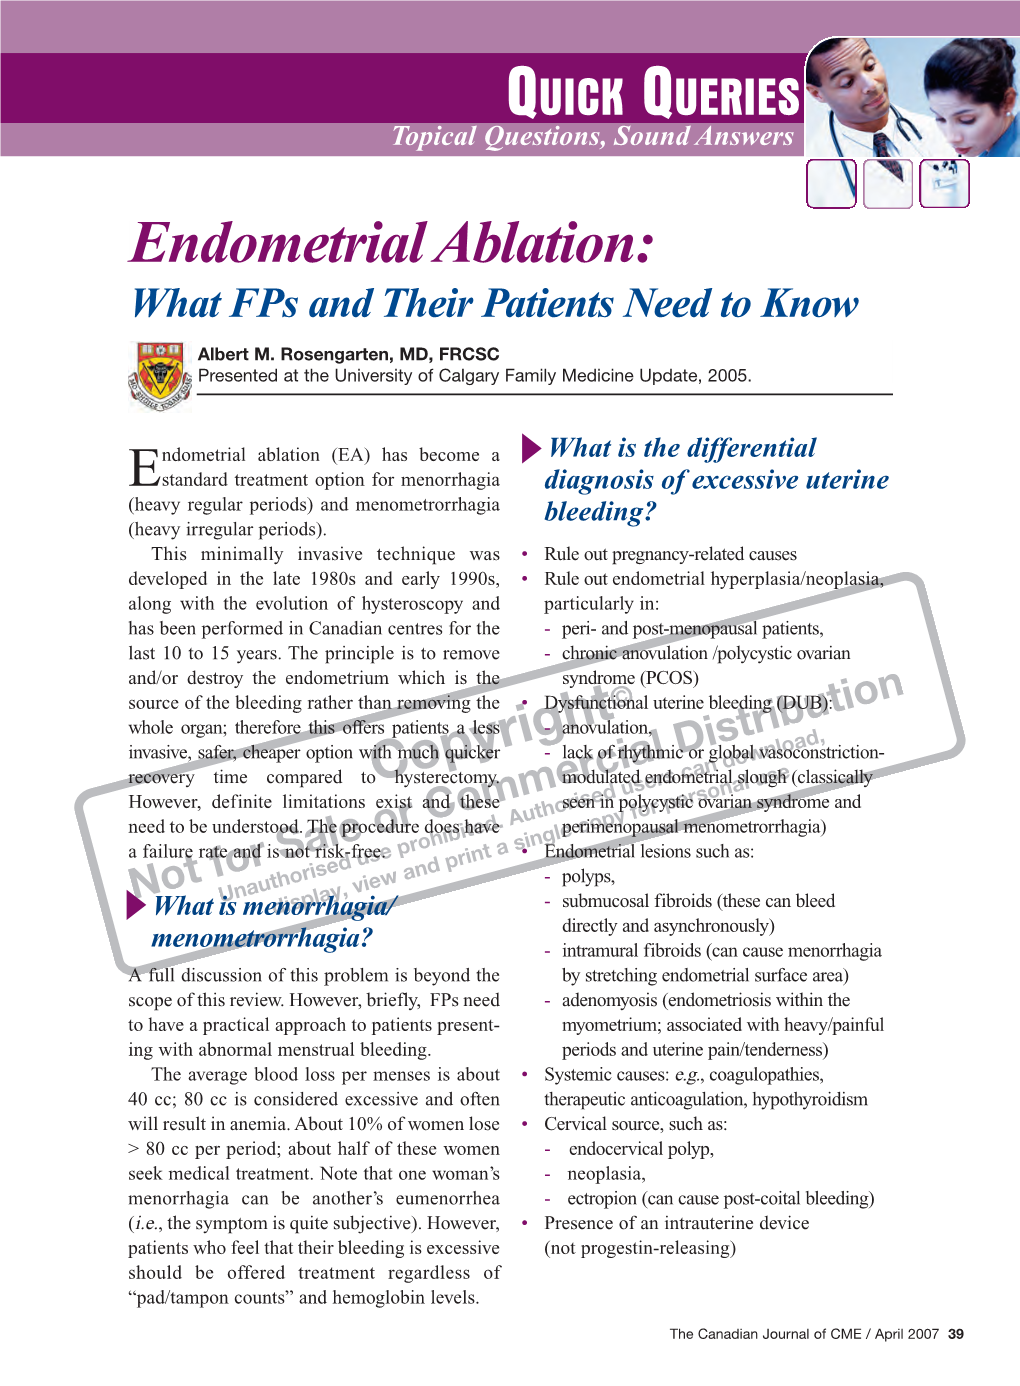 Endometrial Ablation: What Fps and Their Patients Need to Know